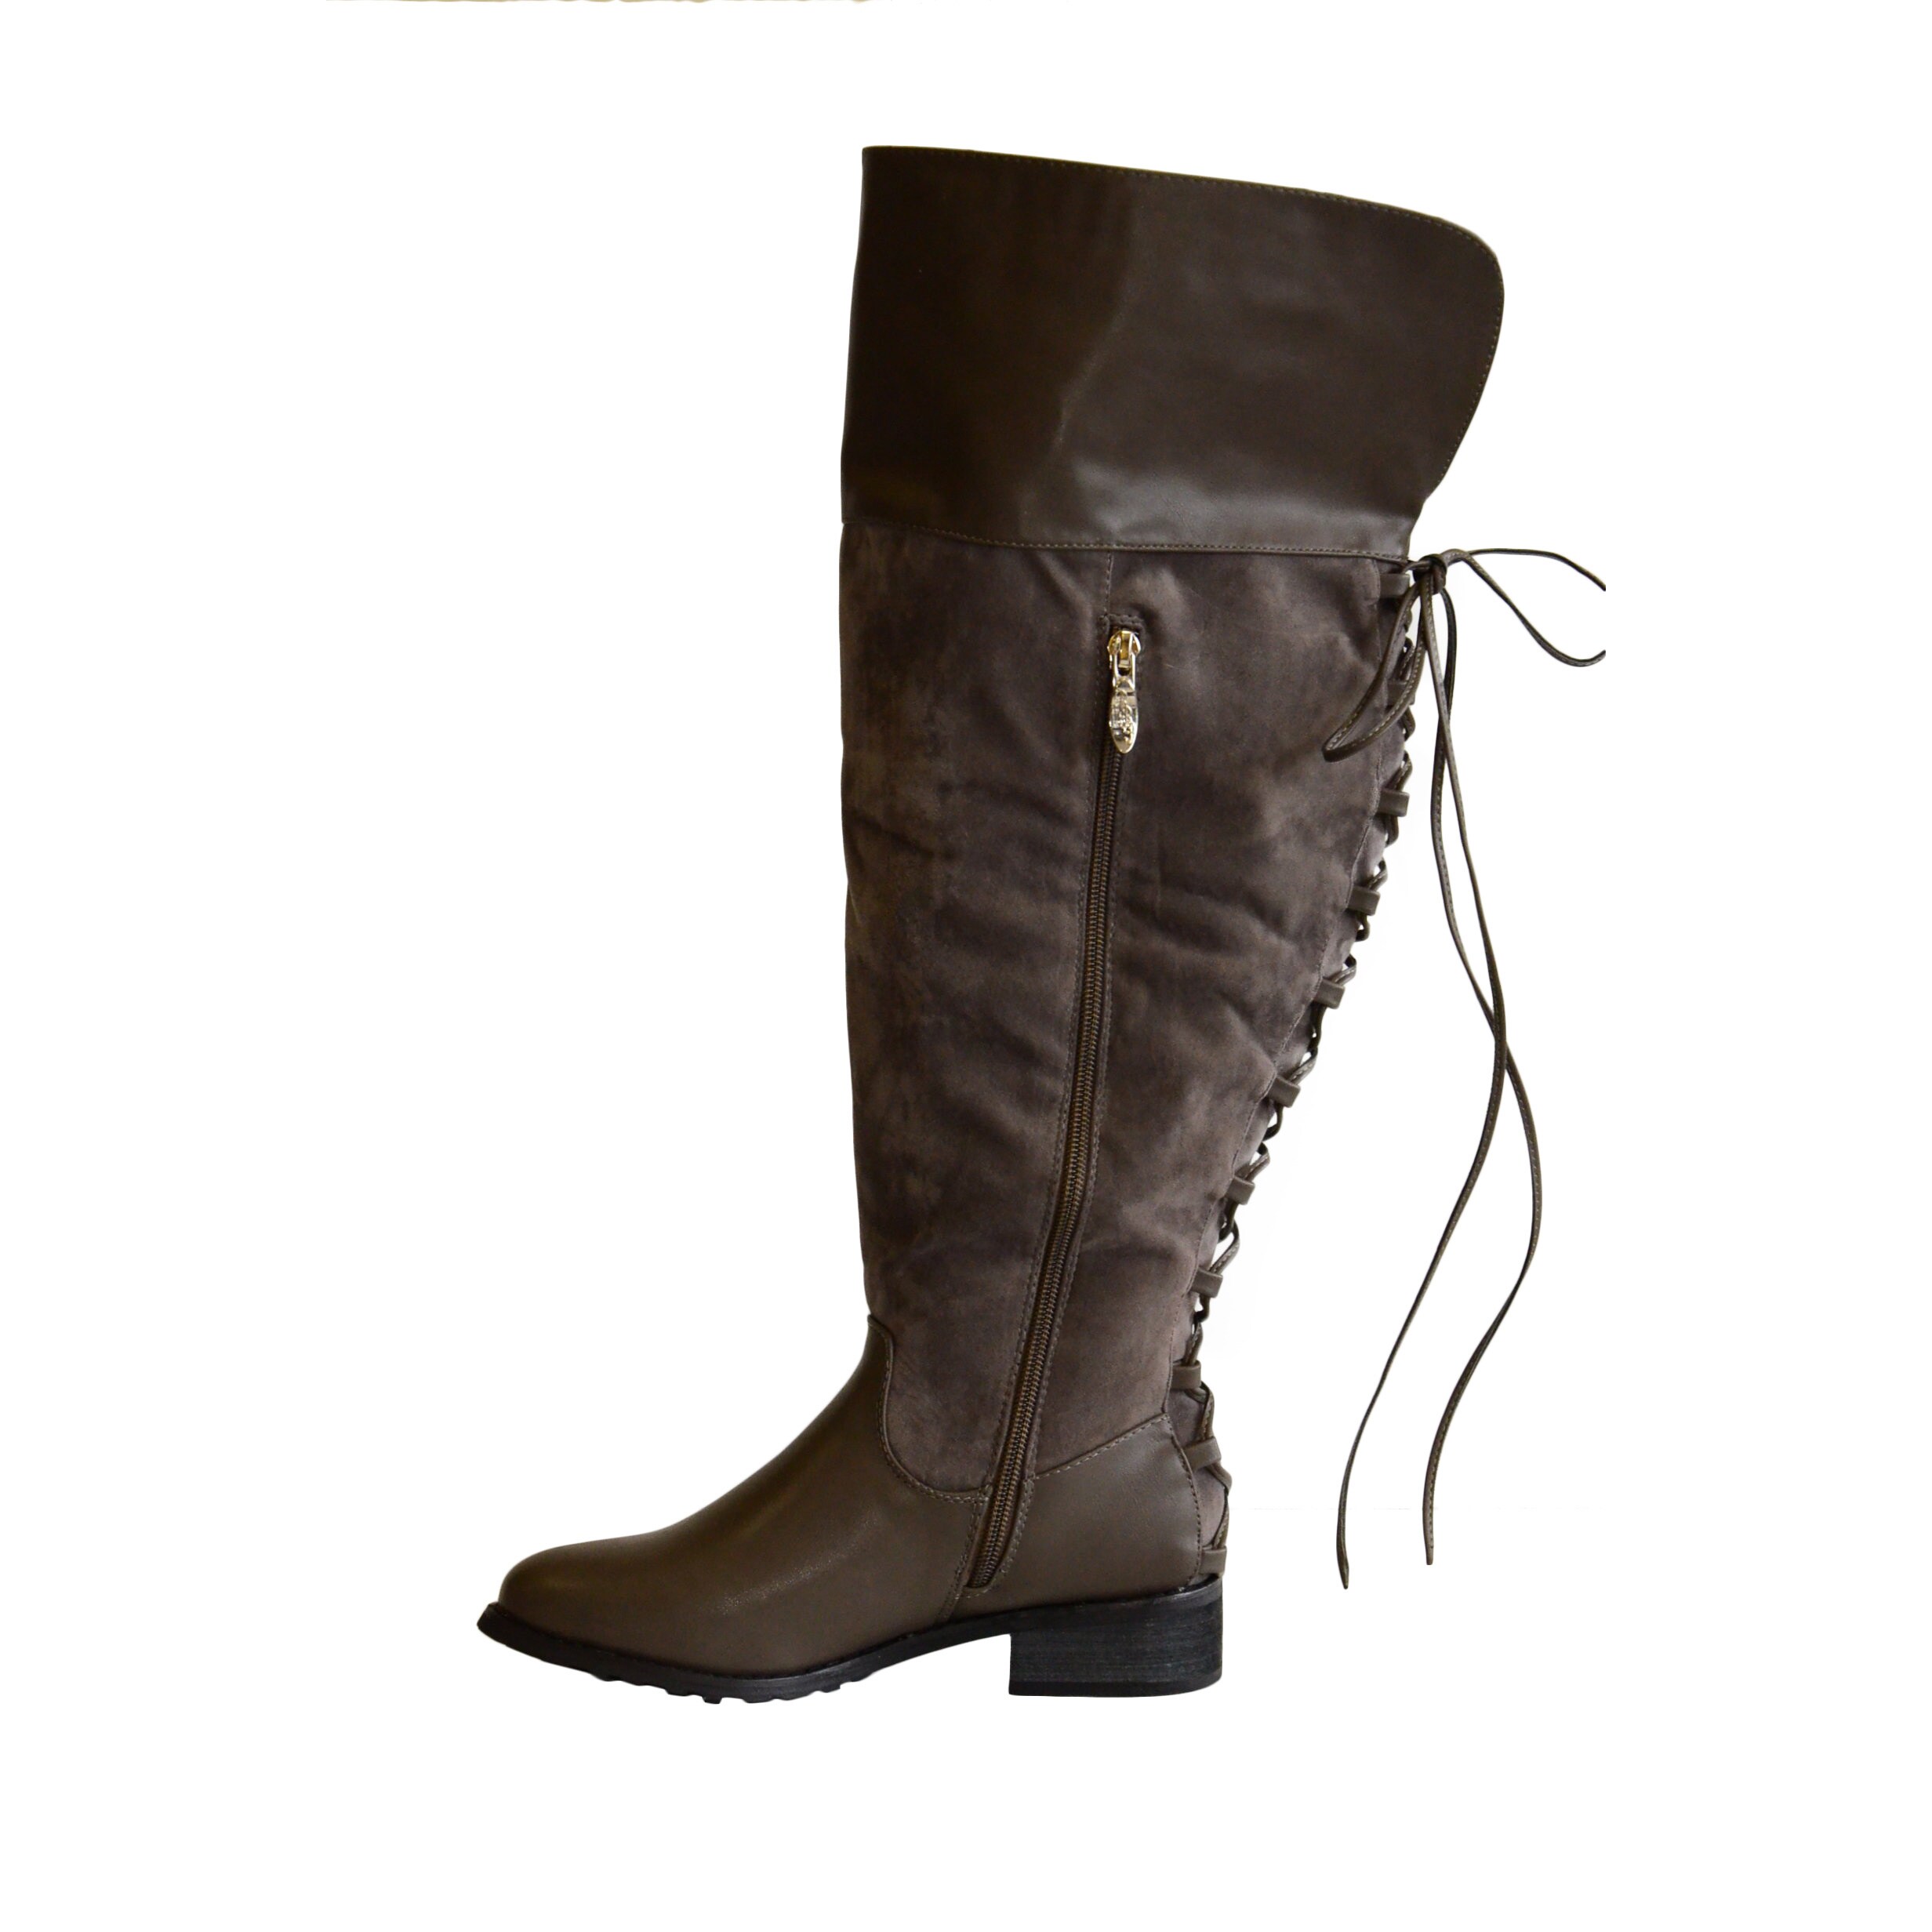 wide calf boots lace up back